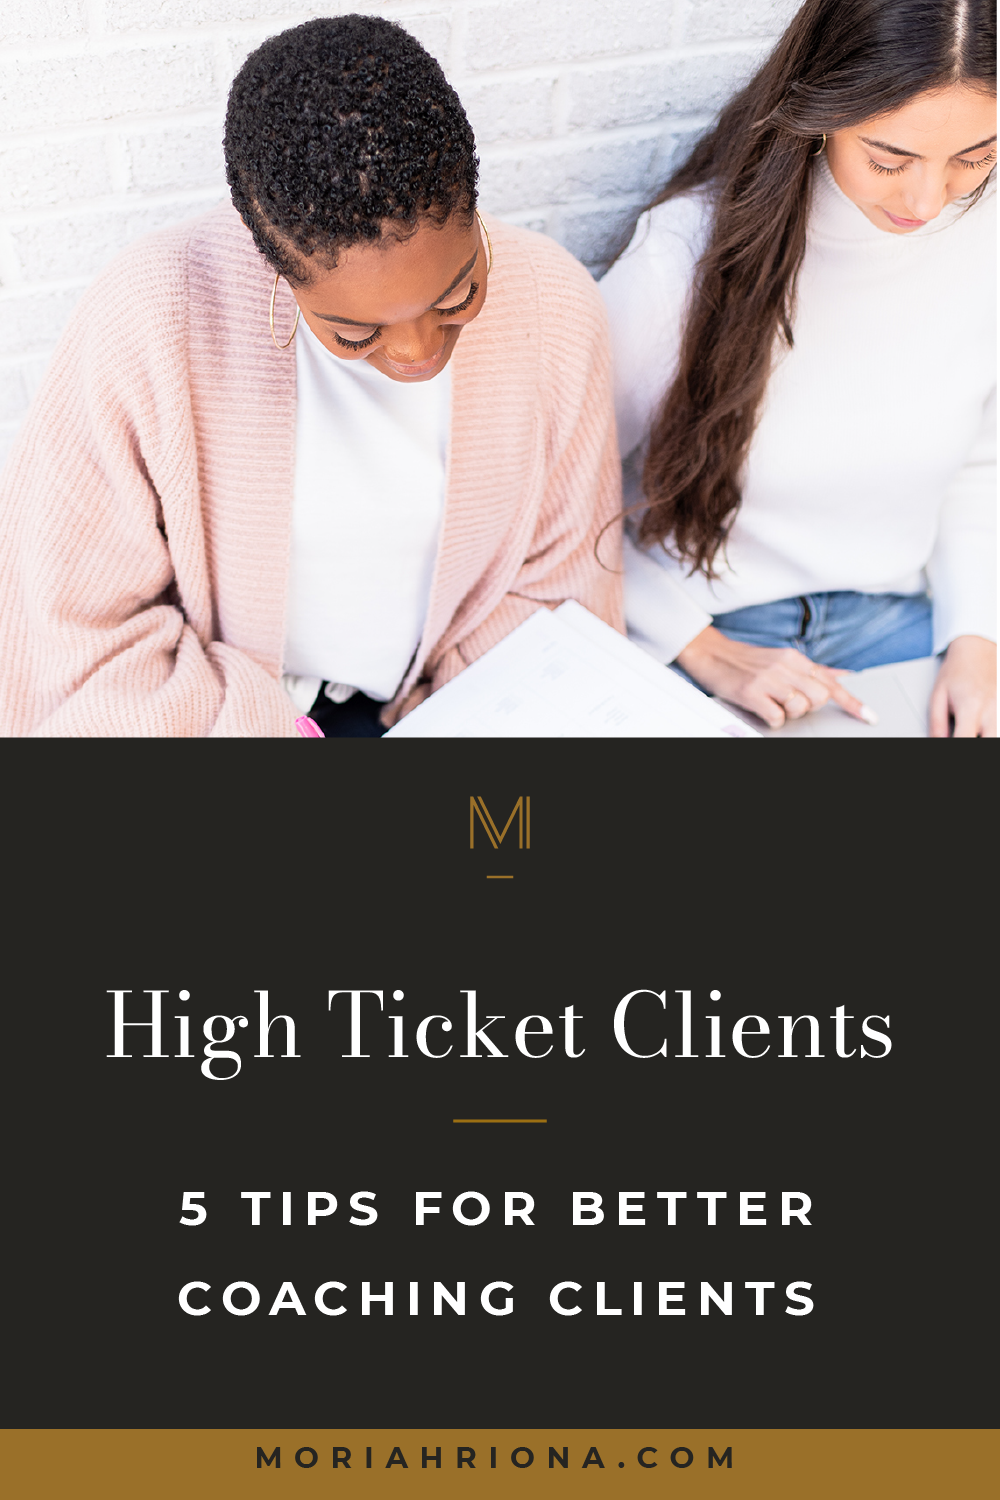 Wondering how to attract higher paying clients? This video is for you! I’m sharing my best tips for how to get high paying clients as a new entrepreneur, how to build a high ticket funnel, my high ticket secrets, lead generation and more! #highticket #coaching #onlinebusiness #entrepreneur